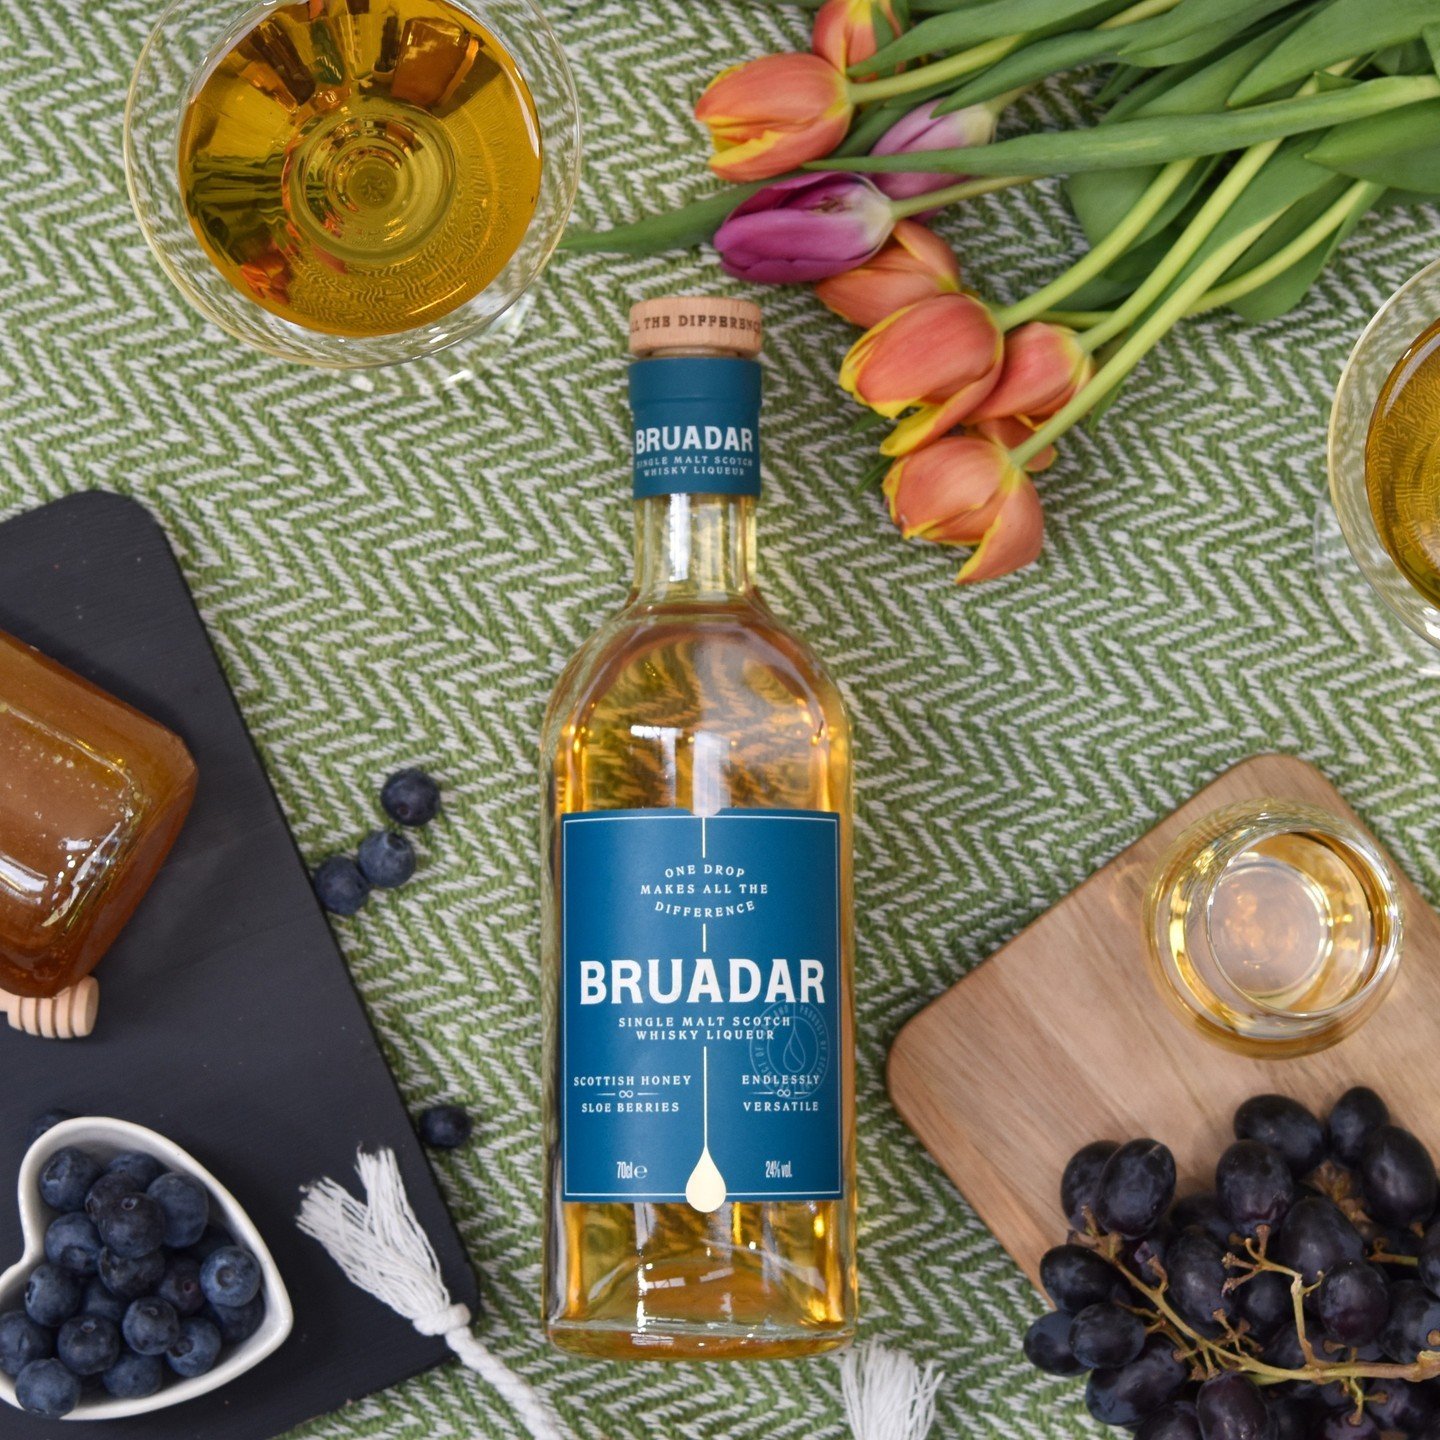 Sip, savour and share🥃⁠
⁠
Bruadar, made for sharing. Enjoy an ice-cold Bruadar with your nearest and dearest - share the sweetness🍯⁠
-⁠
-⁠
-⁠
-⁠
-⁠
#bruadar #liqueur #whisky #whiskey #mswd #morrisonscotchwhiskydistillers #morrisondistillers #scotti